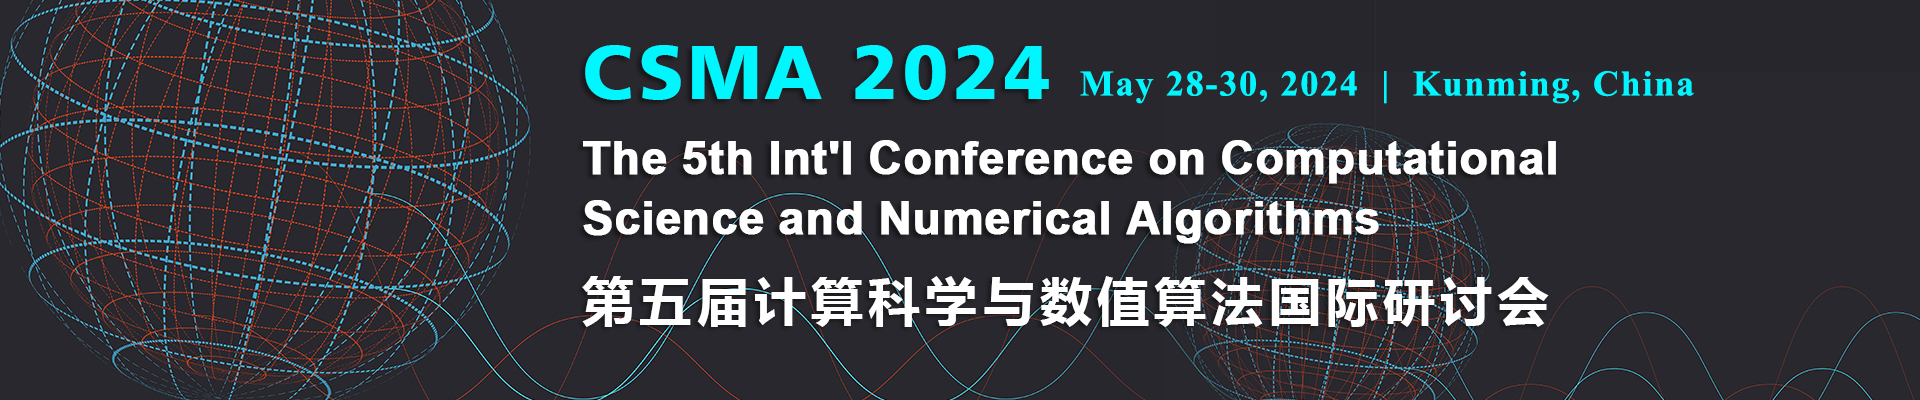 The 5th Int'l Conference on Computational Science and Numerical Algorithms (CSMA 2024), Kunming, Yunnan, China